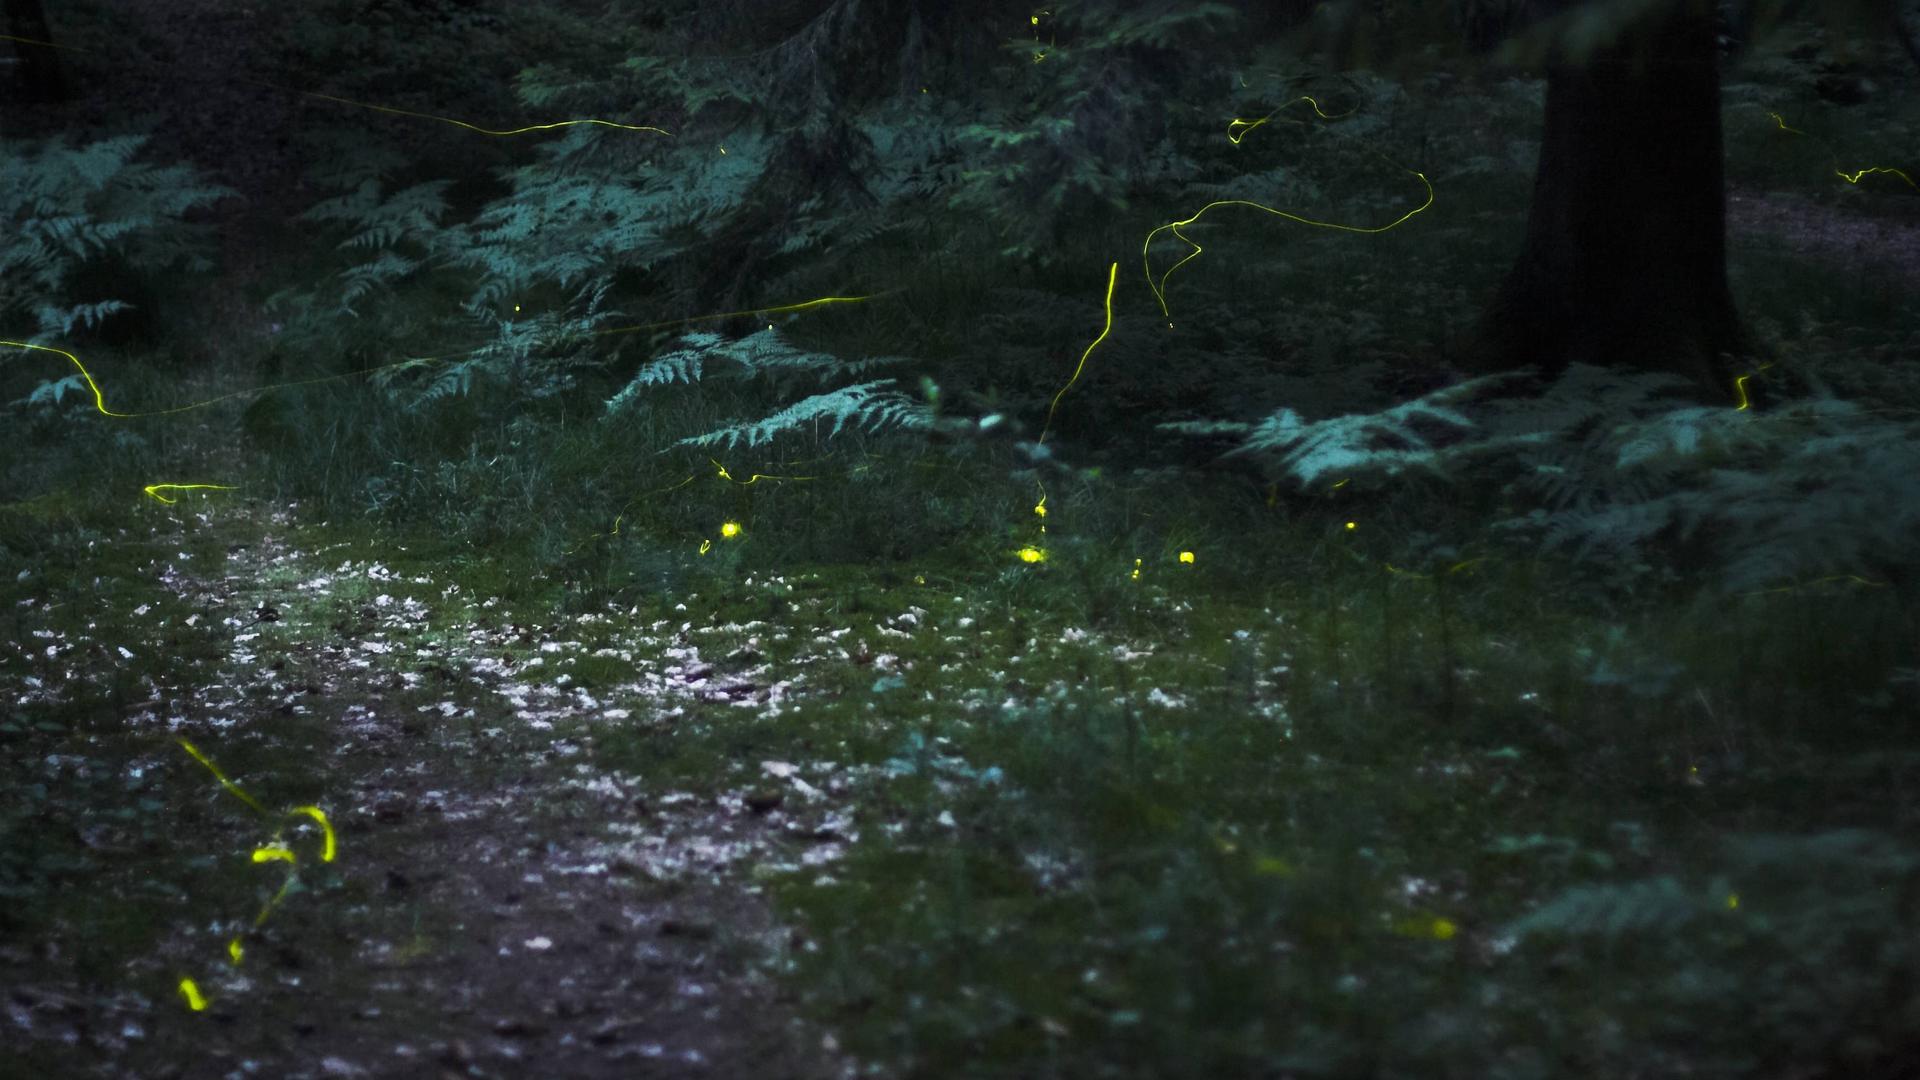 Scientists have discovered the chemical reaction behind a firefly's glow